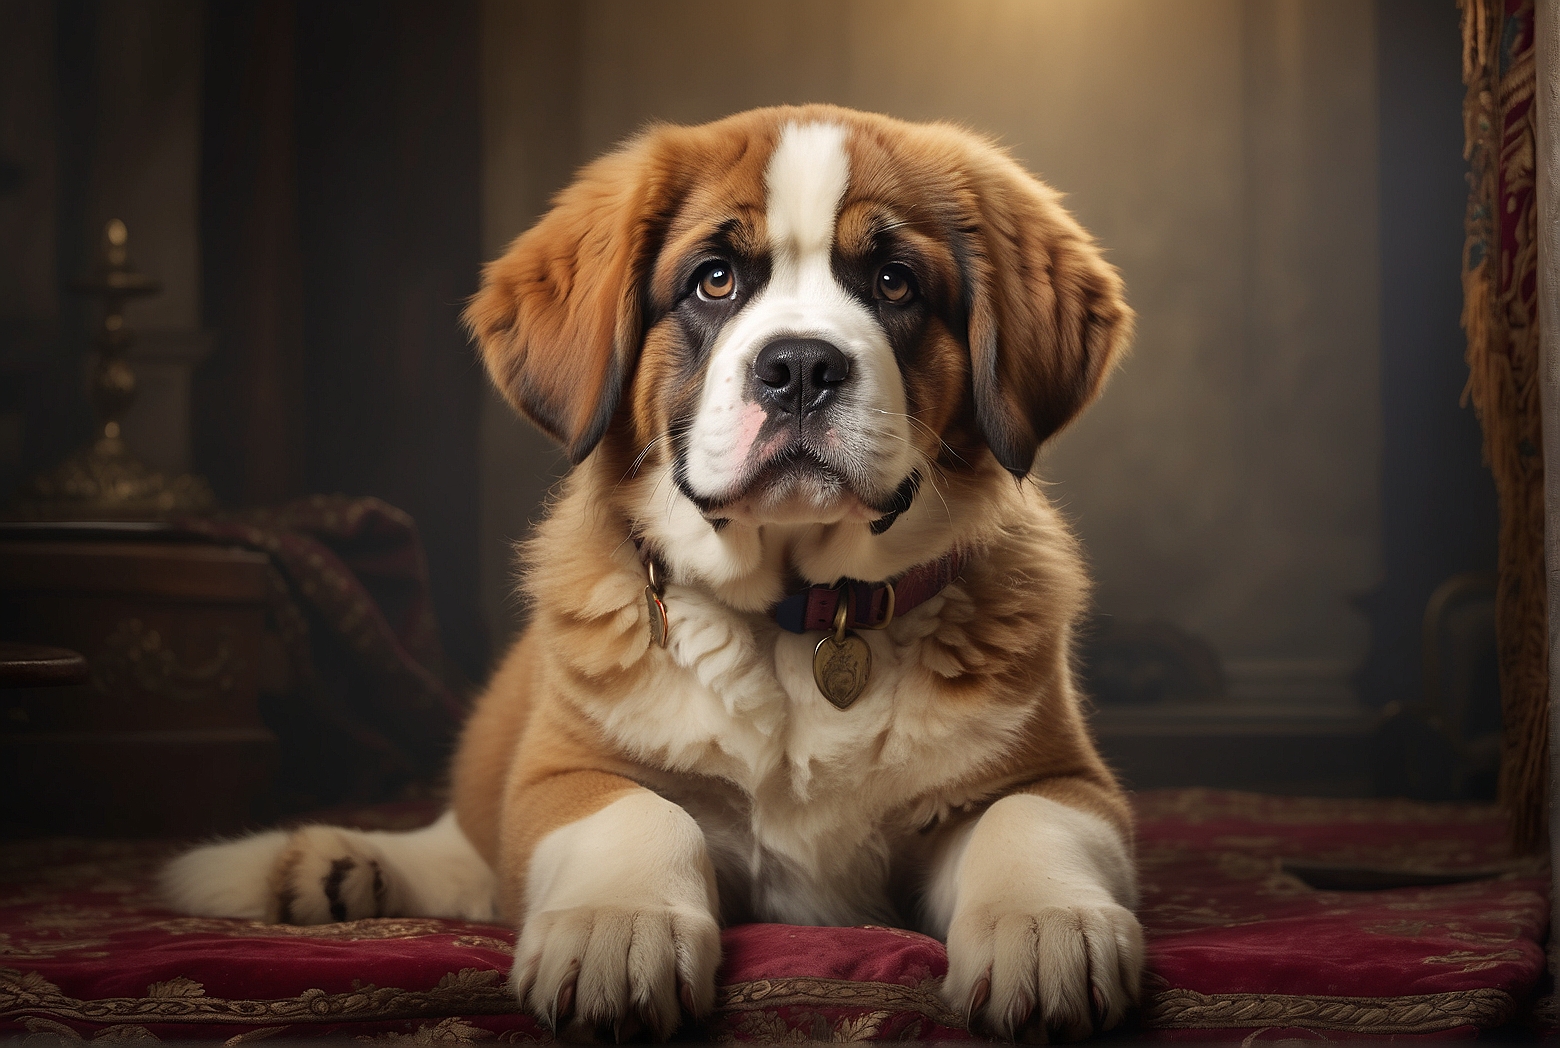 How Much Does a Trained Saint Bernard Cost?